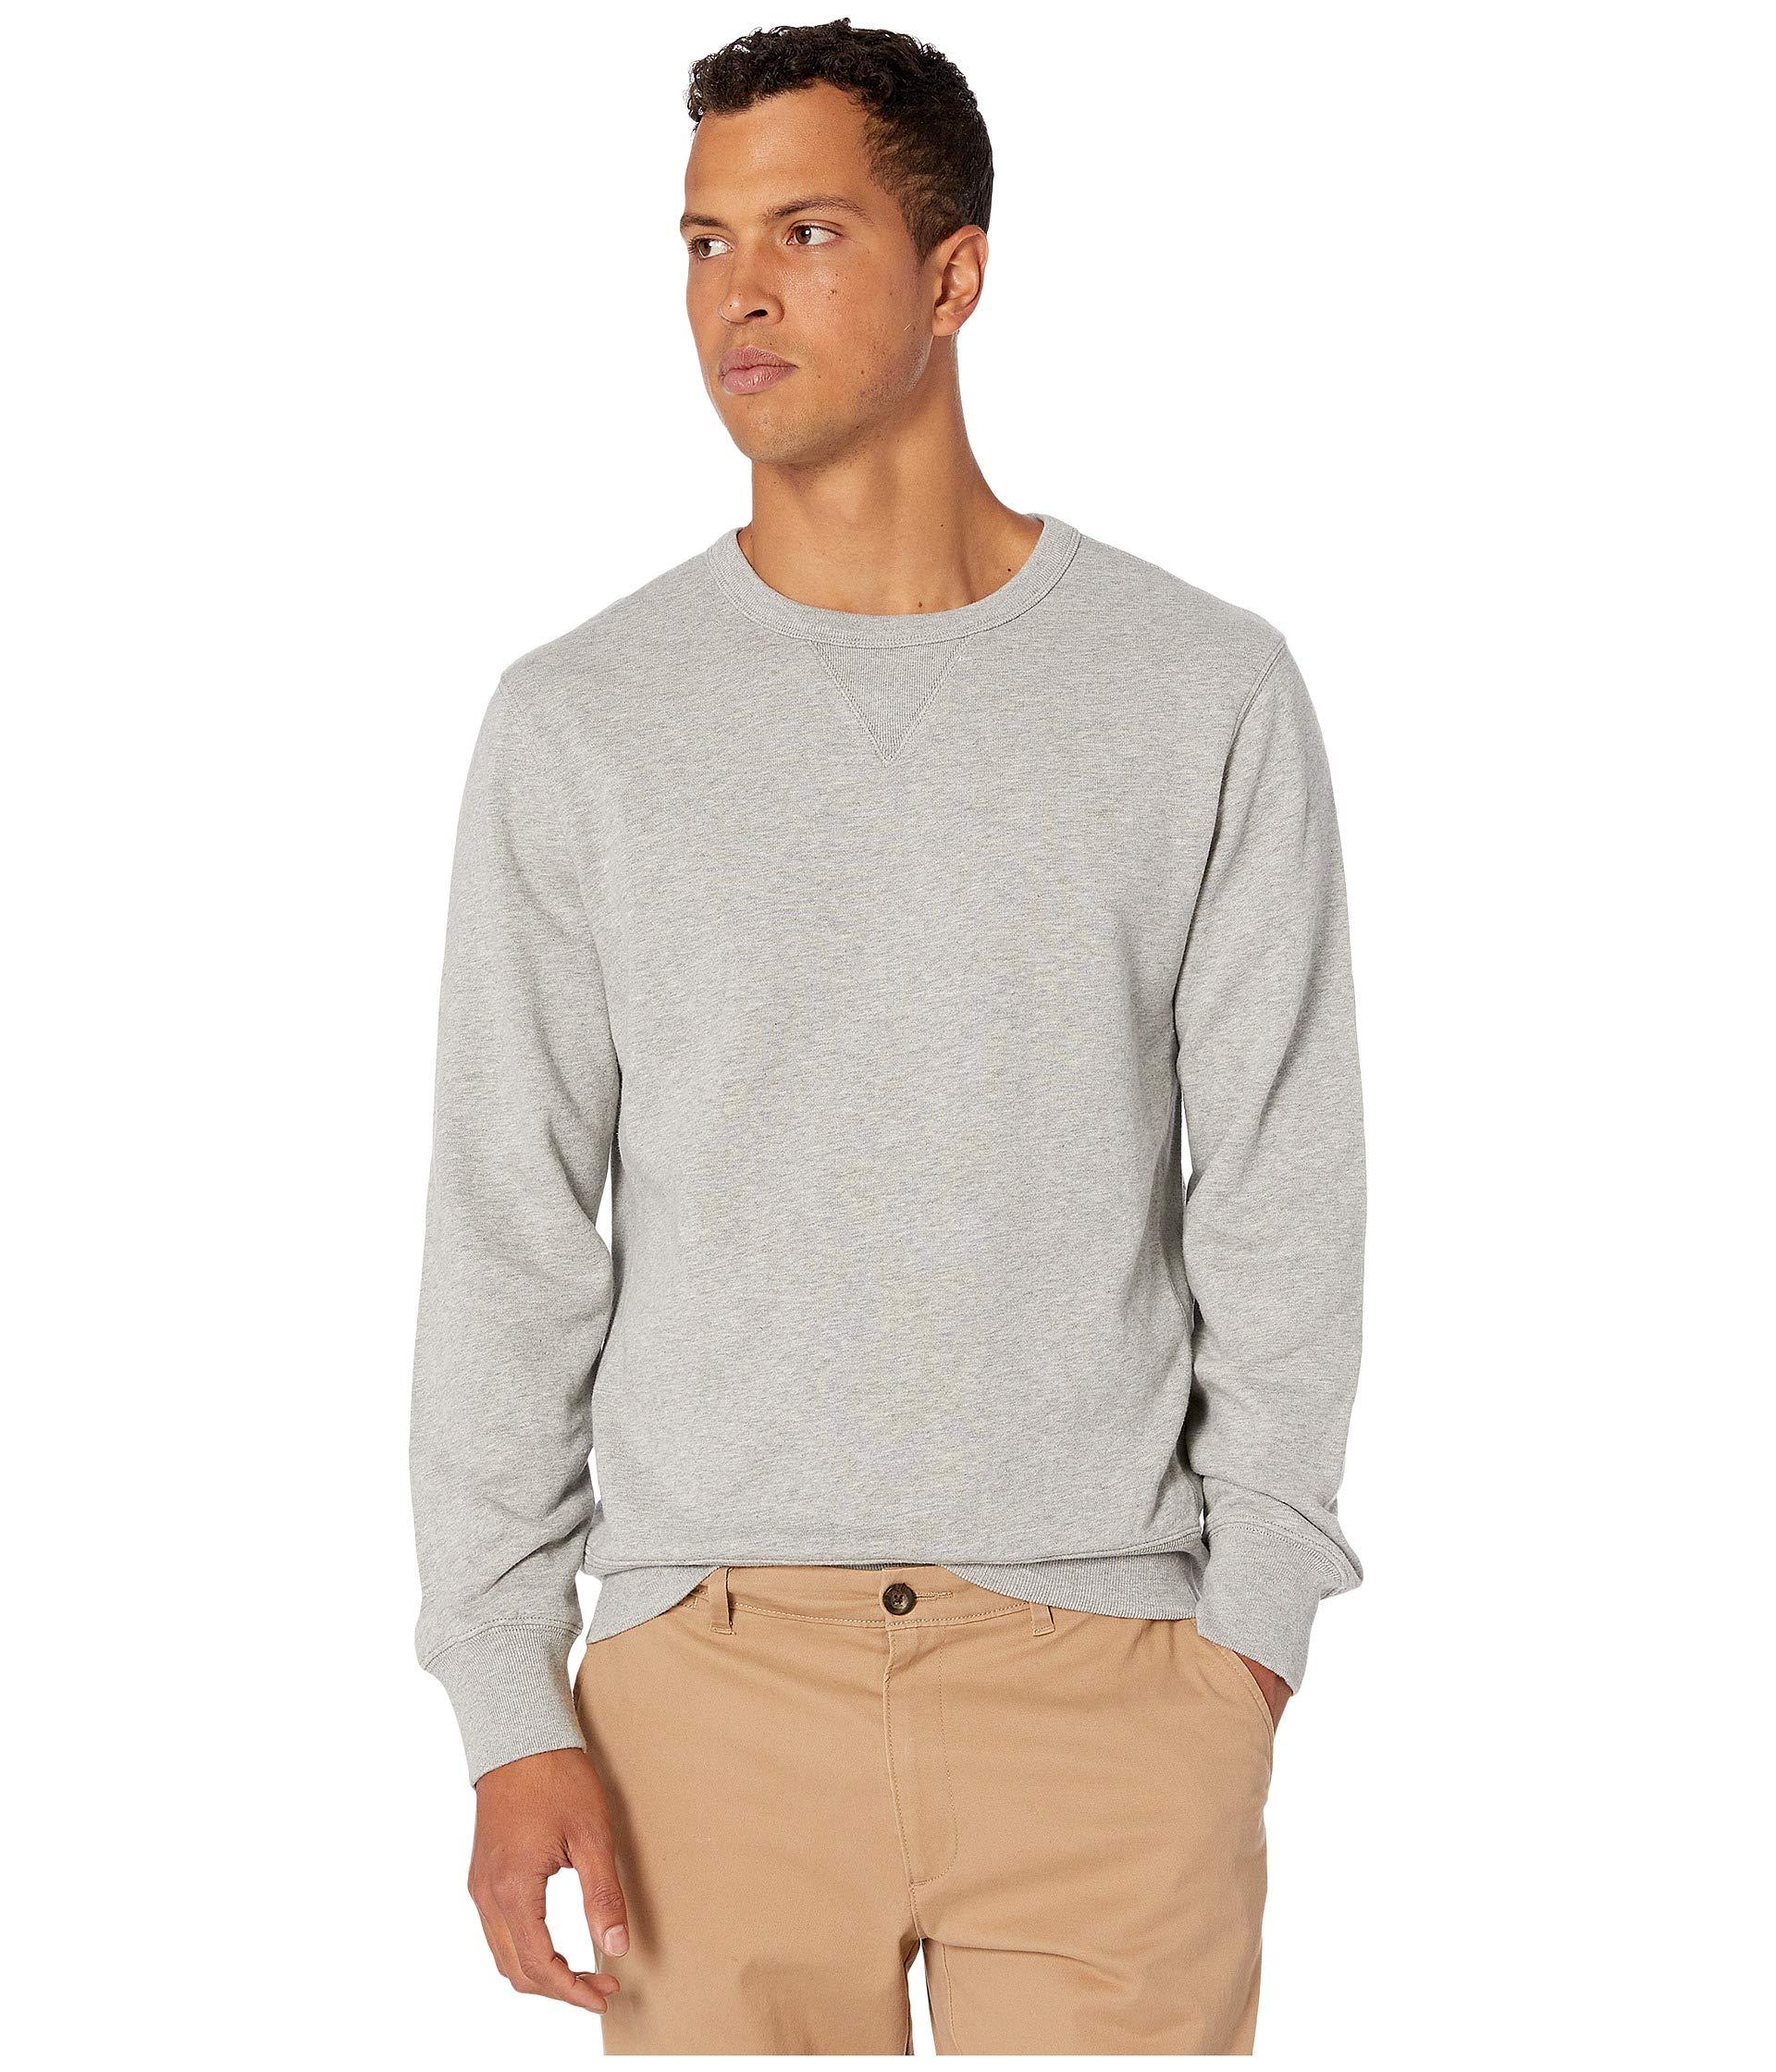 J.Crew Cotton French Terry Crewneck Sweatshirt in Gray for Men - Lyst